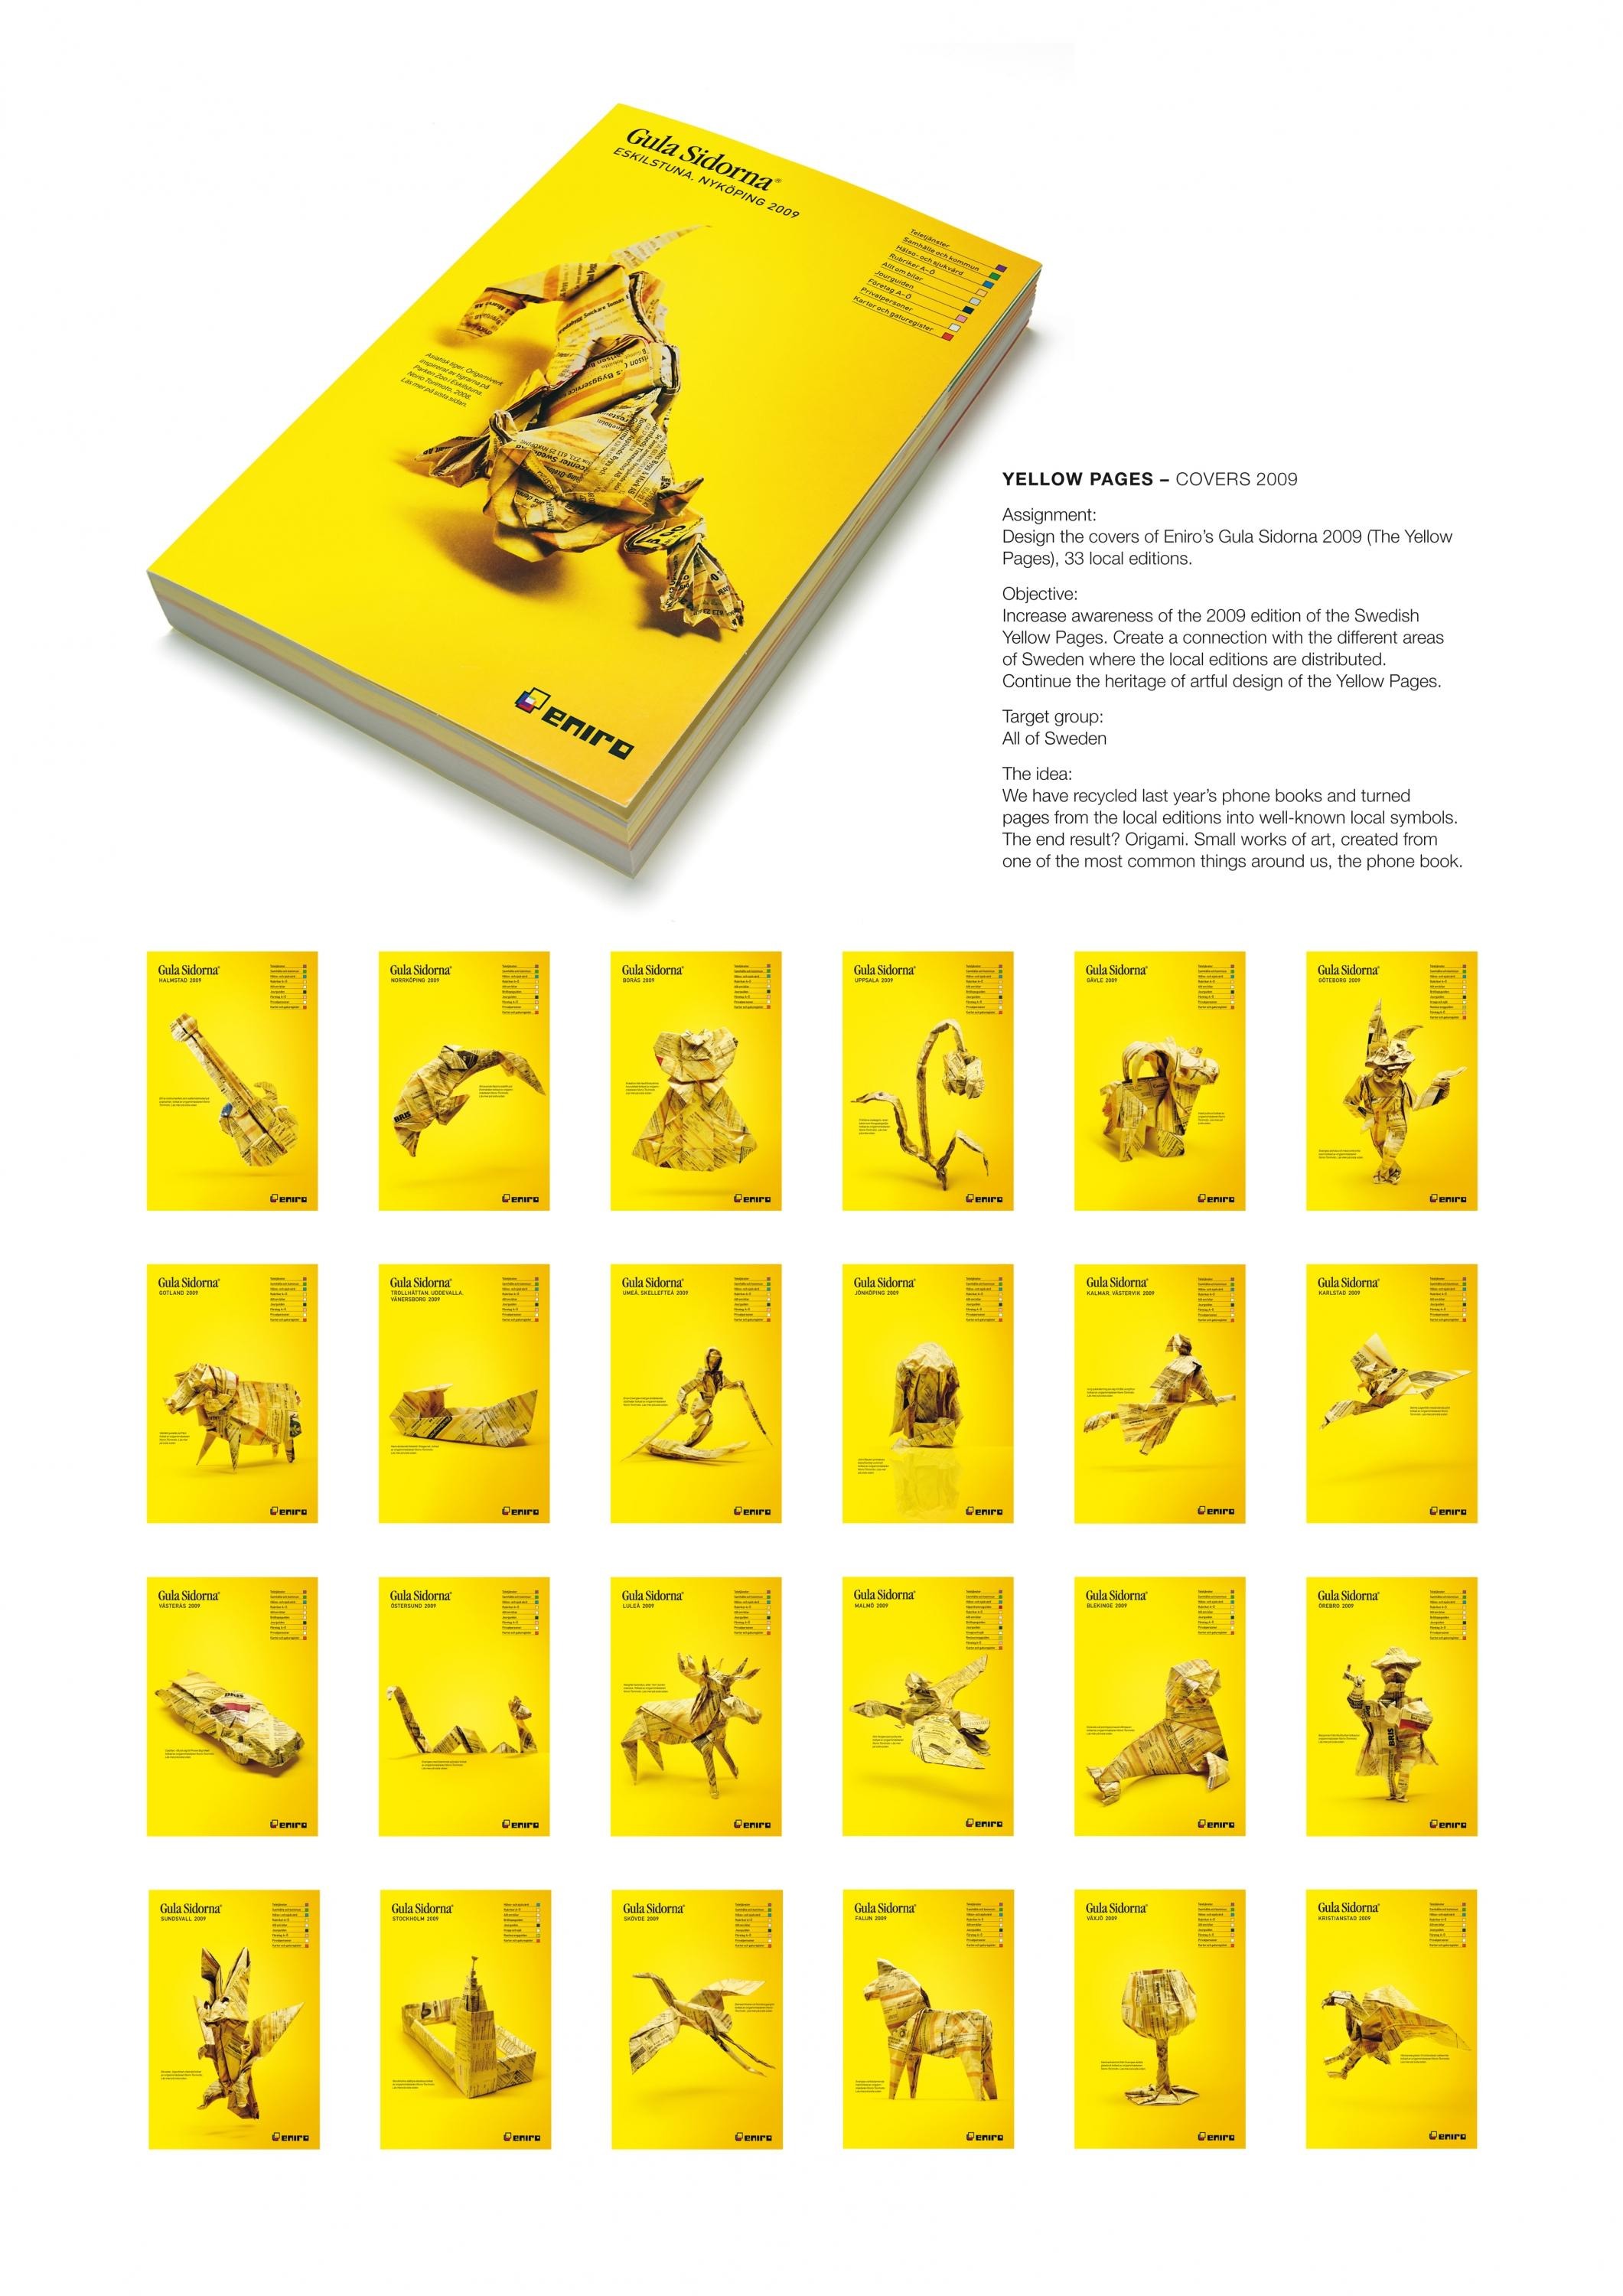 YELLOW PAGES PHONE DIRECTORY